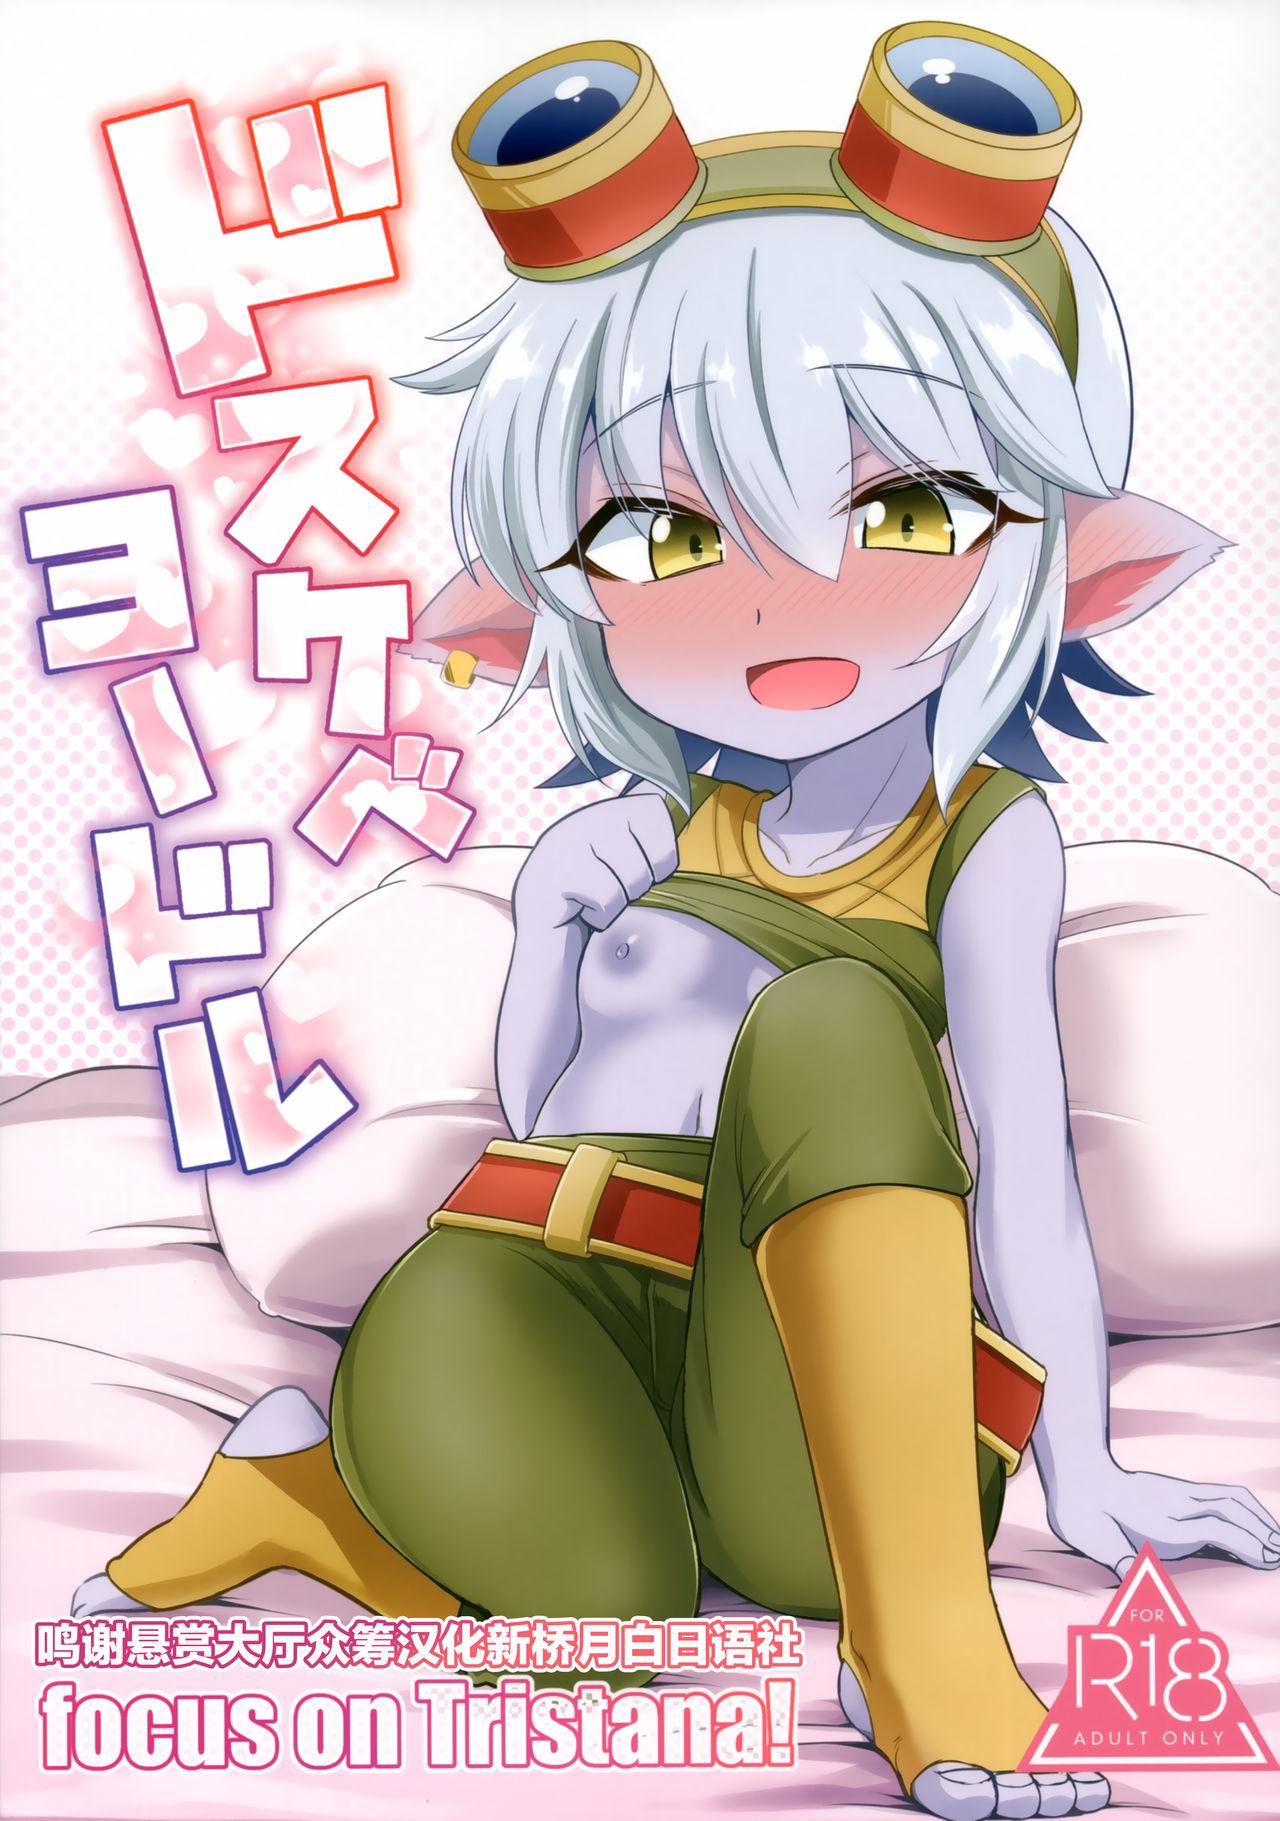 Twinks Dosukebe Yodle focus on tristana! - League of legends Sapphic - Picture 1